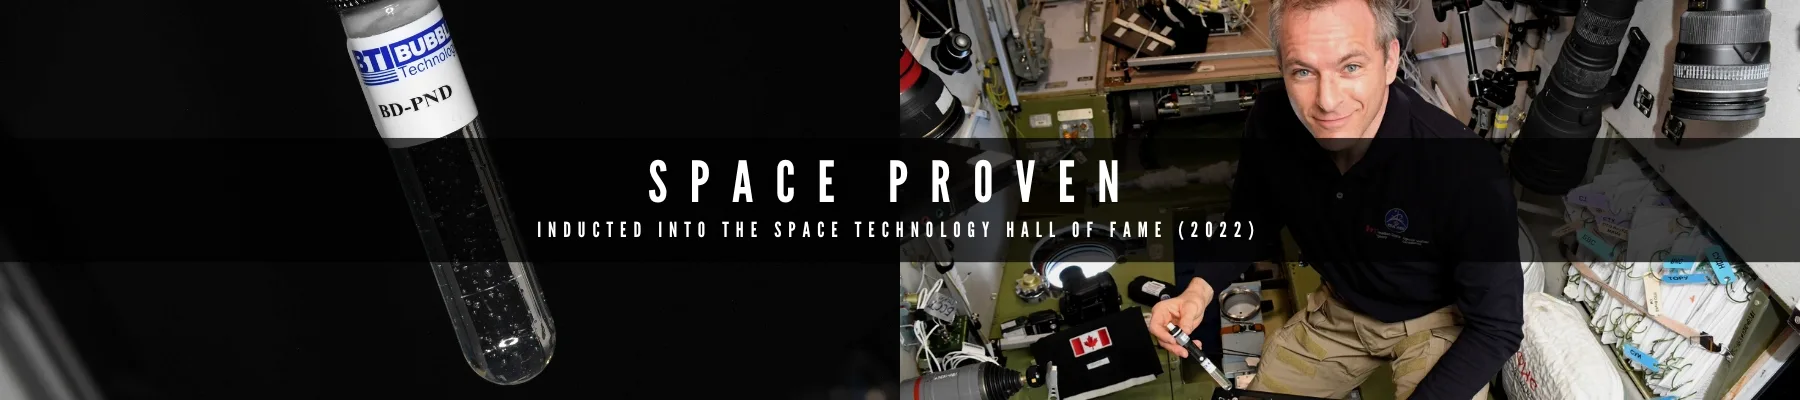 Space Proven - Inducted into the space technology hall of fame (2022)